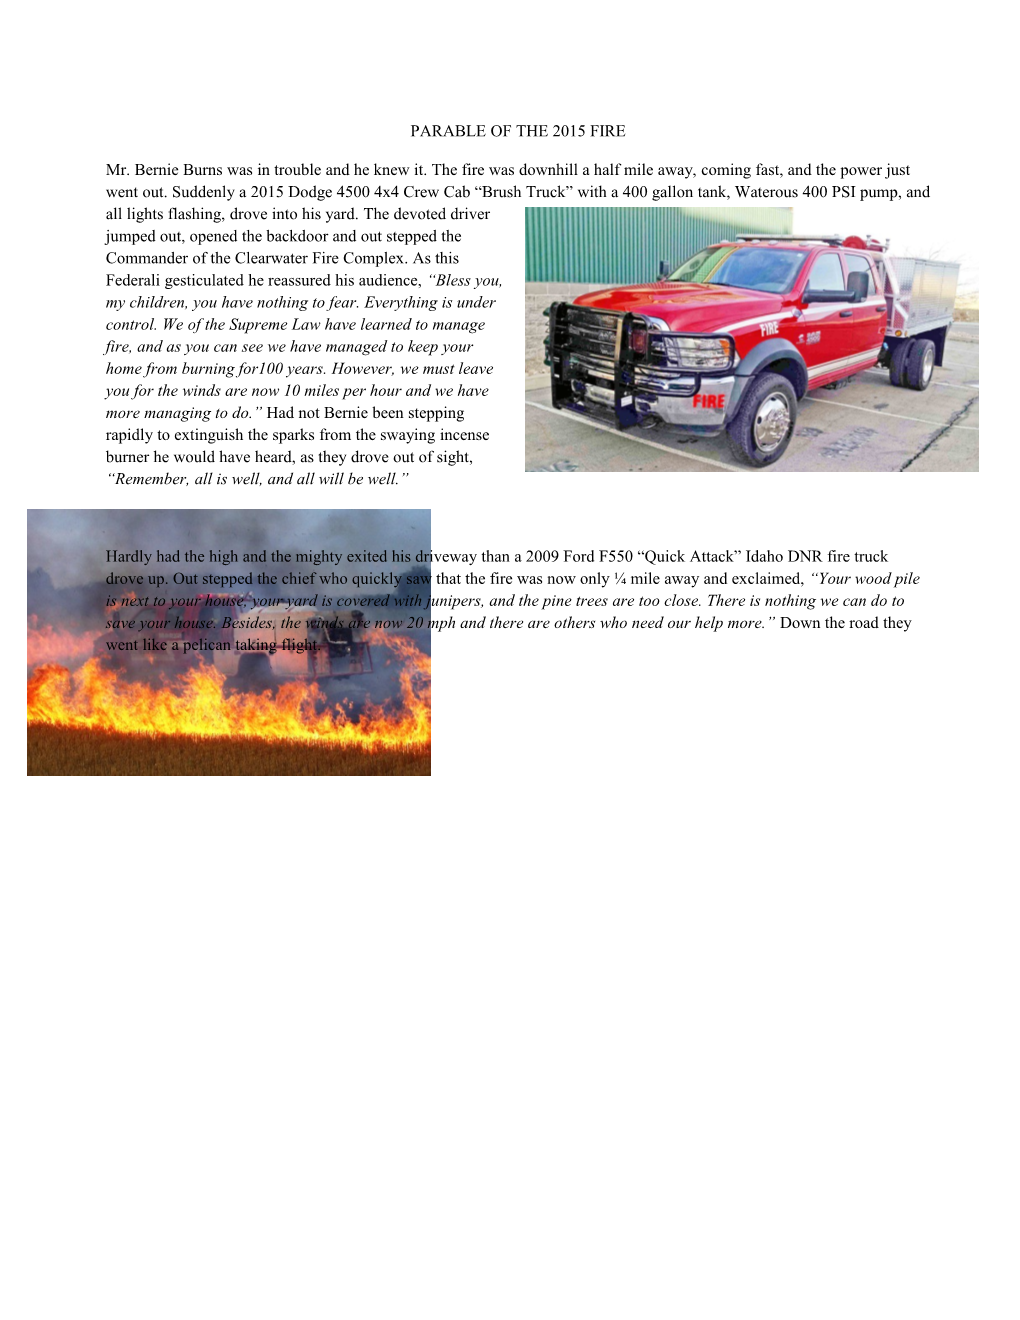 Parable of the 2015 Fire